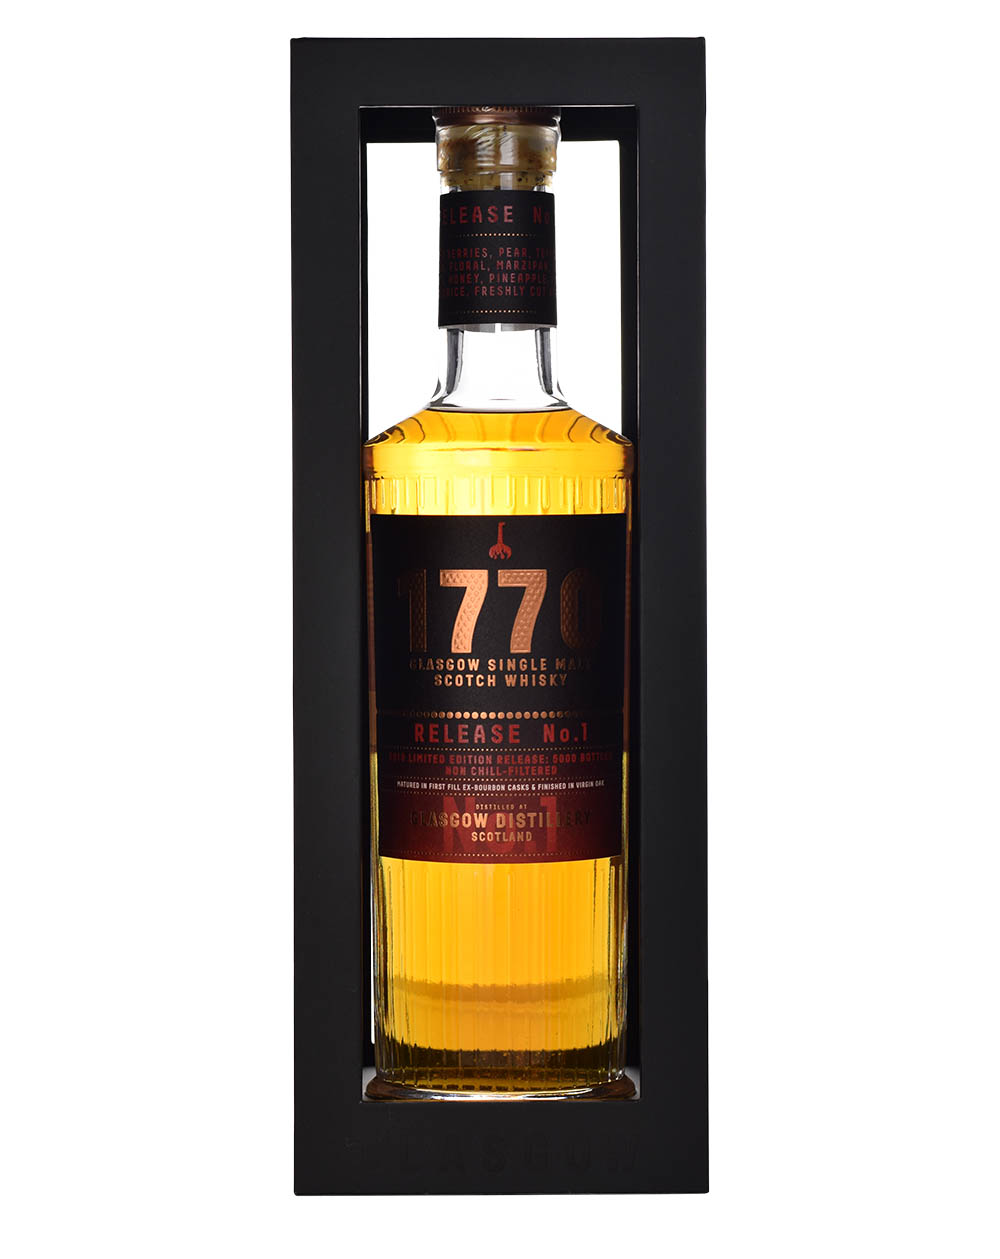 1770 Release No. 1 2018 Limited Release Glasgow Single Malt Box Musthave Malts